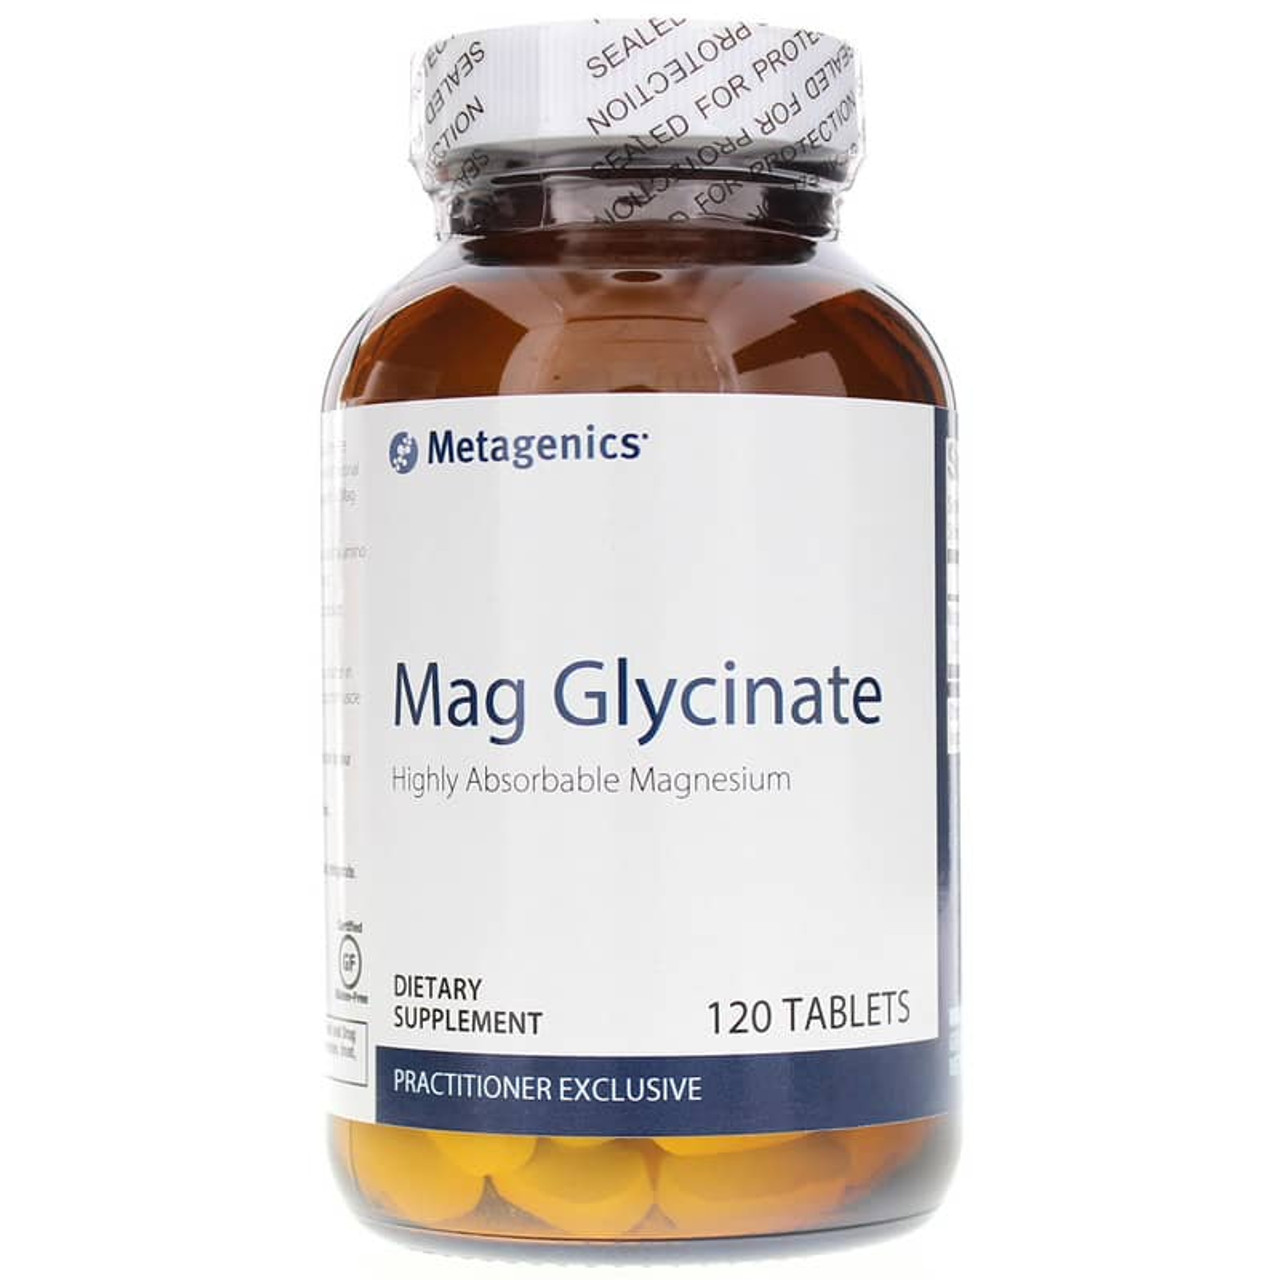 Magnesium glycinate supplements provide high levels of magnesium while causing minimal digestive upset